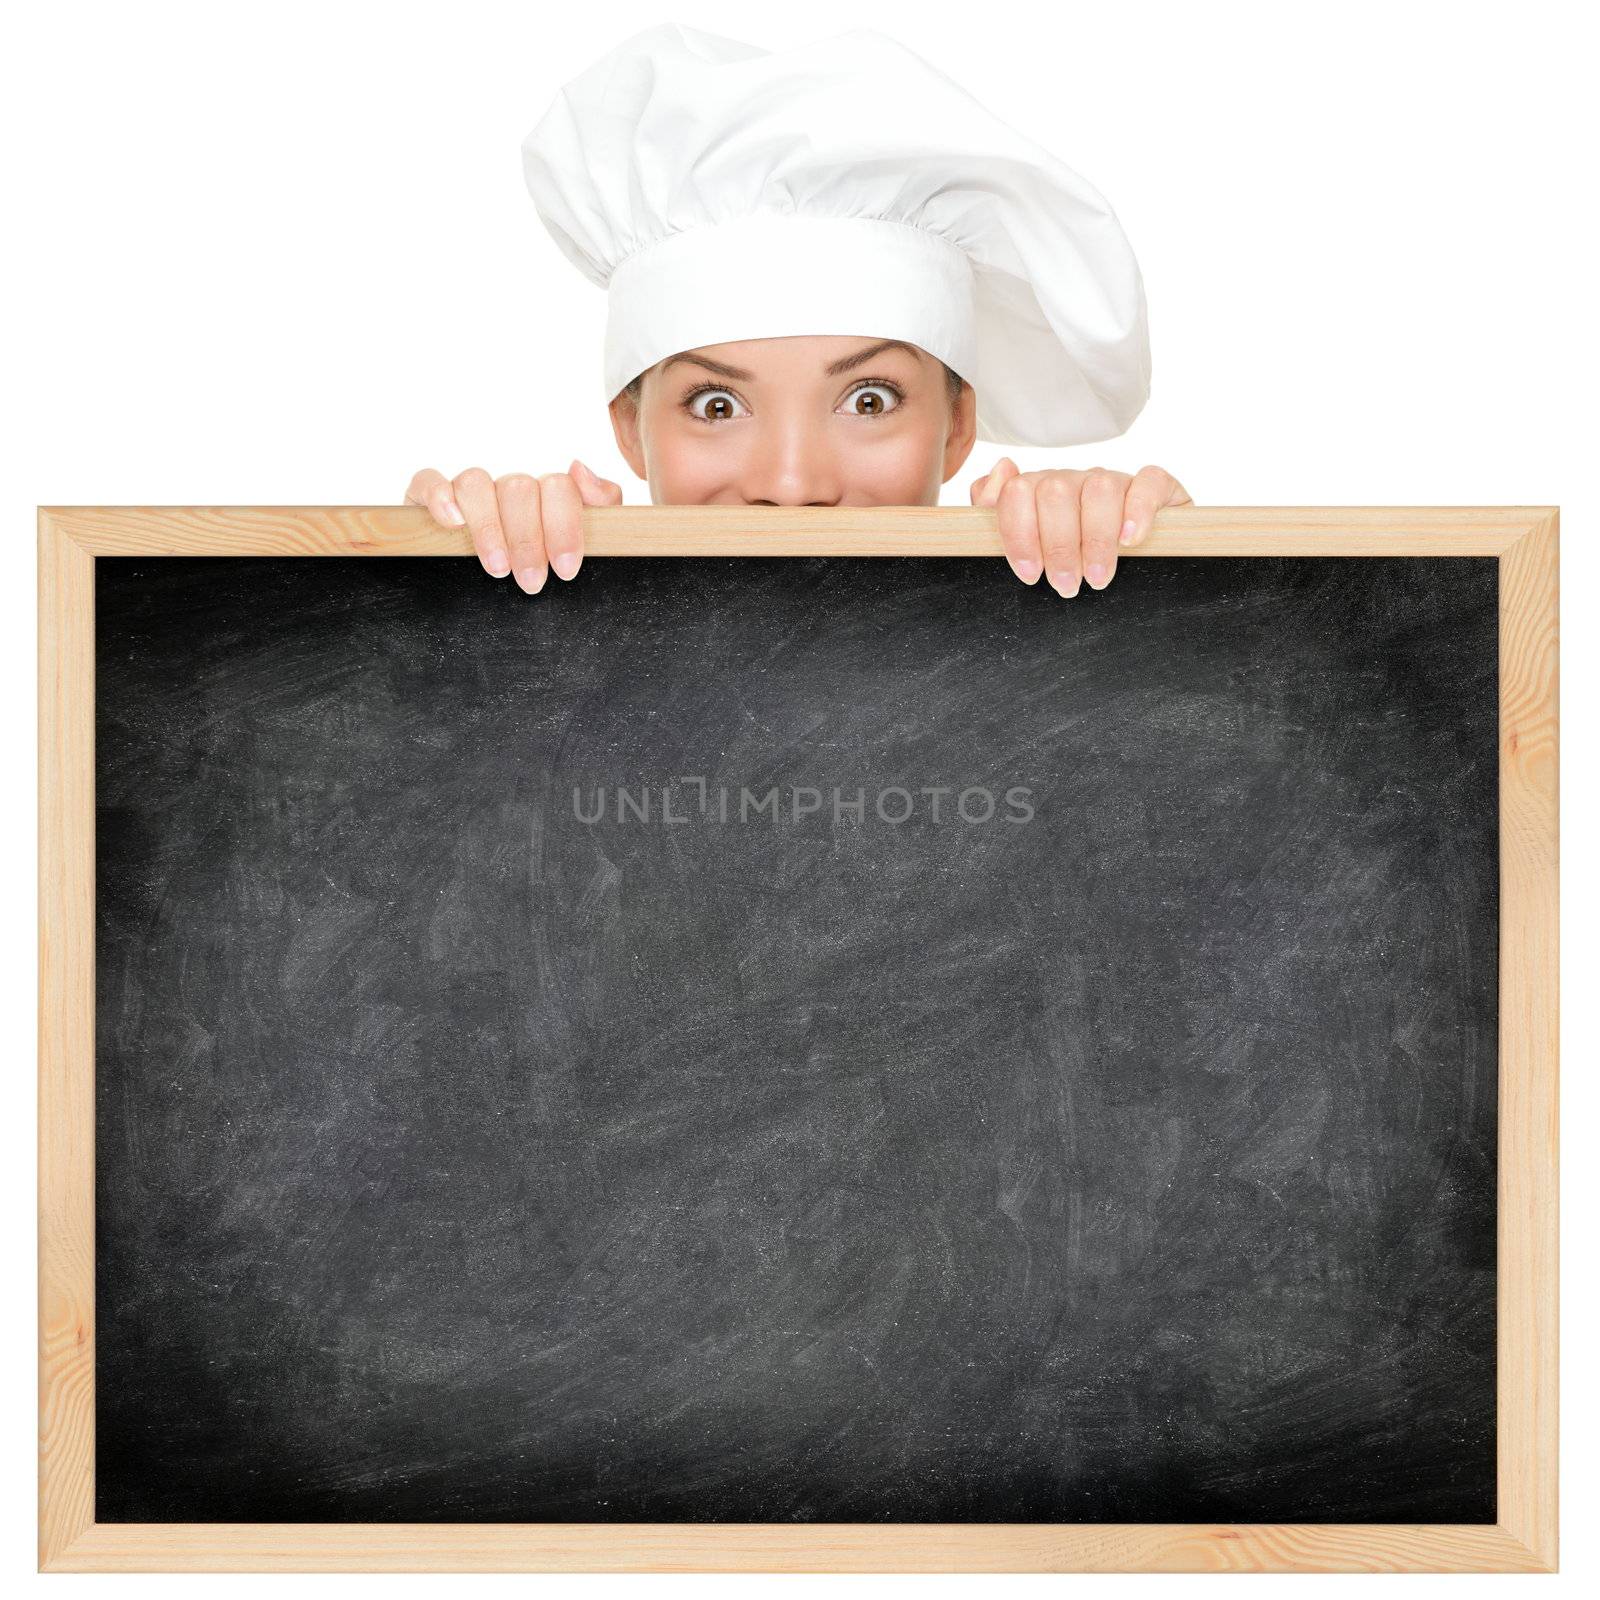 Chef showing restaurant menu blackboard - empty blank with copy space for text etc. Funny woman cook peeking over sign. Beautiful happy smiling mixed race Caucasian / Asian female model. Isolated on white background.